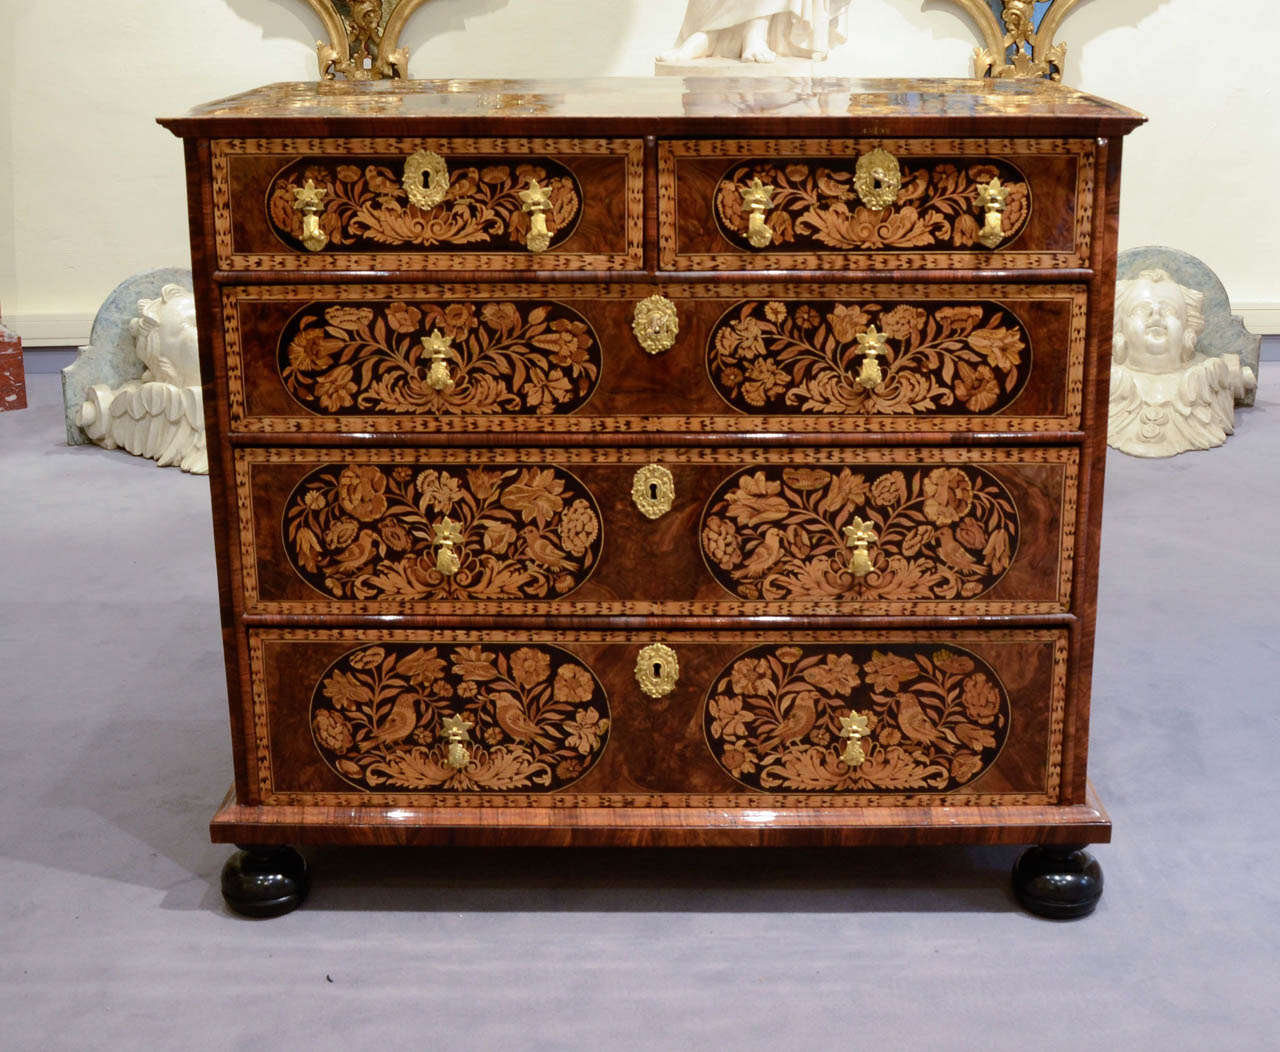 Rectangular shape. With five drawers on four rows. Flowery and birds decor on a black wood background and walnut scrolls. Woods employed for the marquetry are: sycamore, hornbeam wood, Barberry, maple, birchwood and walnut. The opening handles and